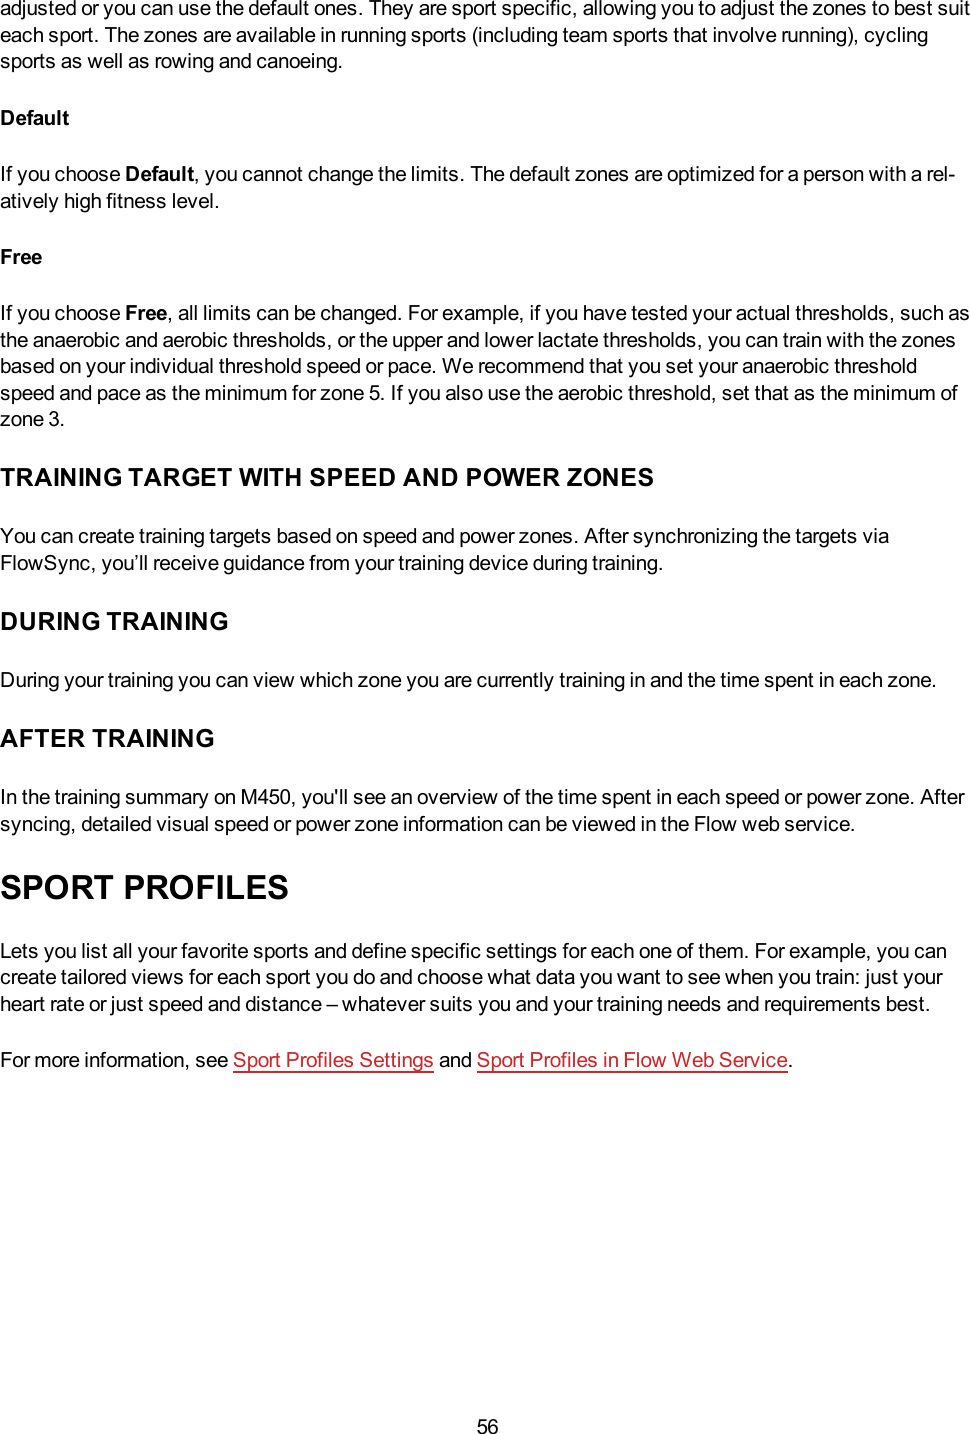 56adjusted or you can use the default ones. They are sport specific, allowing you to adjust the zones to best suiteach sport. The zones are available in running sports (including team sports that involve running), cyclingsports as well as rowing and canoeing.DefaultIf you choose Default, you cannot change the limits. The default zones are optimized for a person with a rel-atively high fitness level.FreeIf you choose Free, all limits can be changed. For example, if you have tested your actual thresholds, such asthe anaerobic and aerobic thresholds, or the upper and lower lactate thresholds, you can train with the zonesbased on your individual threshold speed or pace. We recommend that you set your anaerobic thresholdspeed and pace as the minimum for zone 5. If you also use the aerobic threshold, set that as the minimum ofzone 3.TRAINING TARGET WITH SPEED AND POWER ZONESYou can create training targets based on speed and power zones. After synchronizing the targets viaFlowSync, you’ll receive guidance from your training device during training.DURING TRAININGDuring your training you can view which zone you are currently training in and the time spent in each zone.AFTER TRAININGIn the training summary on M450, you&apos;ll see an overview of the time spent in each speed or power zone. Aftersyncing, detailed visual speed or power zone information can be viewed in the Flow web service.SPORT PROFILESLets you list all your favorite sports and define specific settings for each one of them. For example, you cancreate tailored views for each sport you do and choose what data you want to see when you train: just yourheart rate or just speed and distance – whatever suits you and your training needs and requirements best.For more information, see Sport Profiles Settings and Sport Profiles in Flow Web Service.